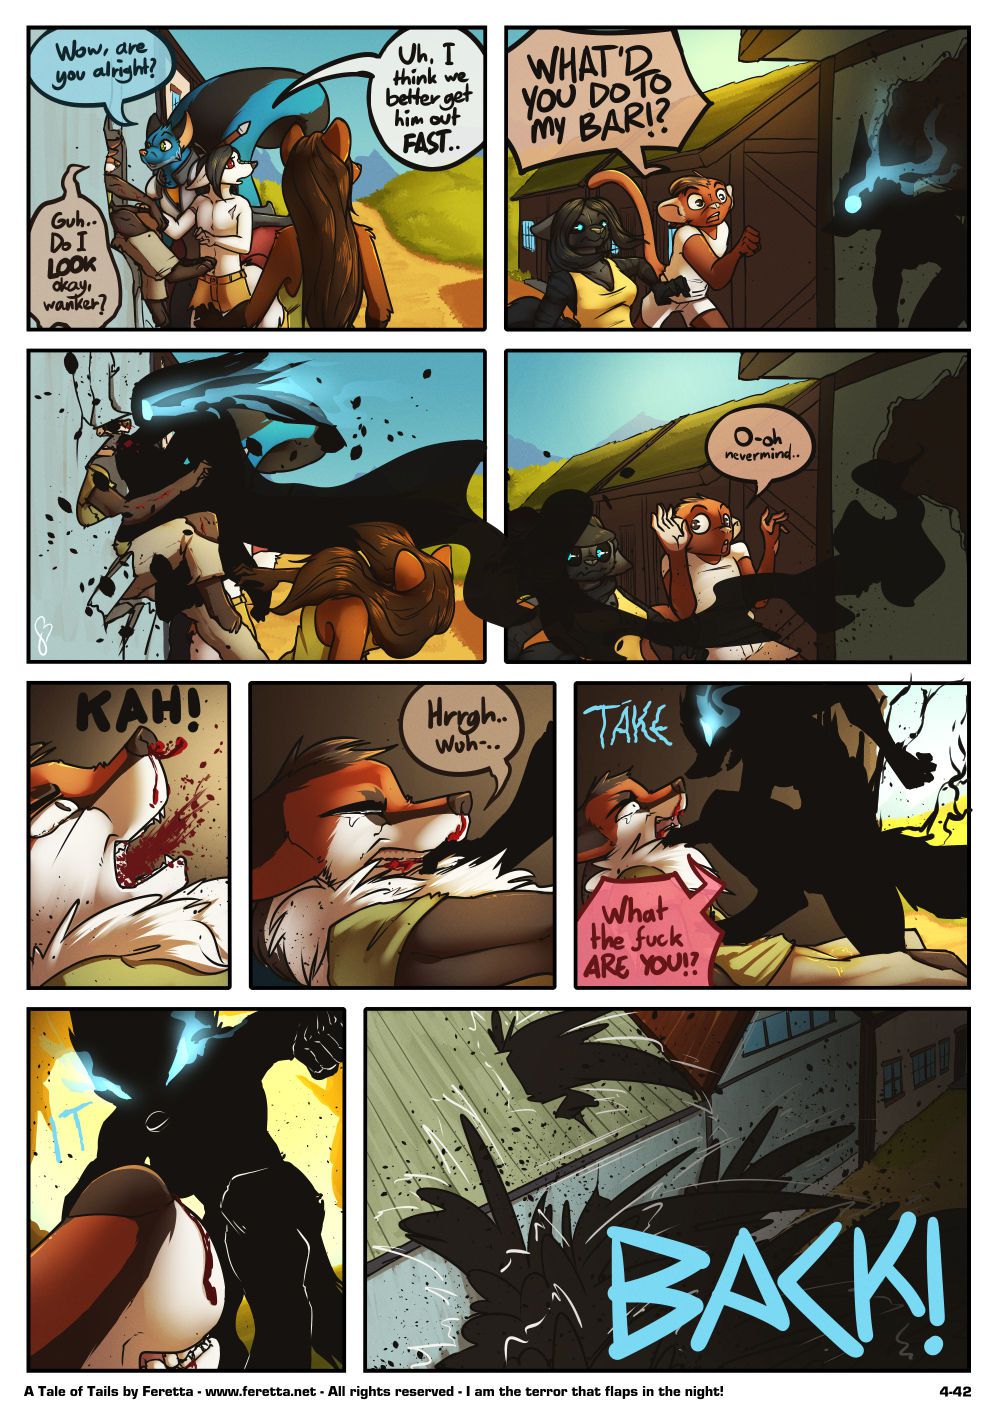 [Feretta] A Tale of Tails (Ongoing) 192